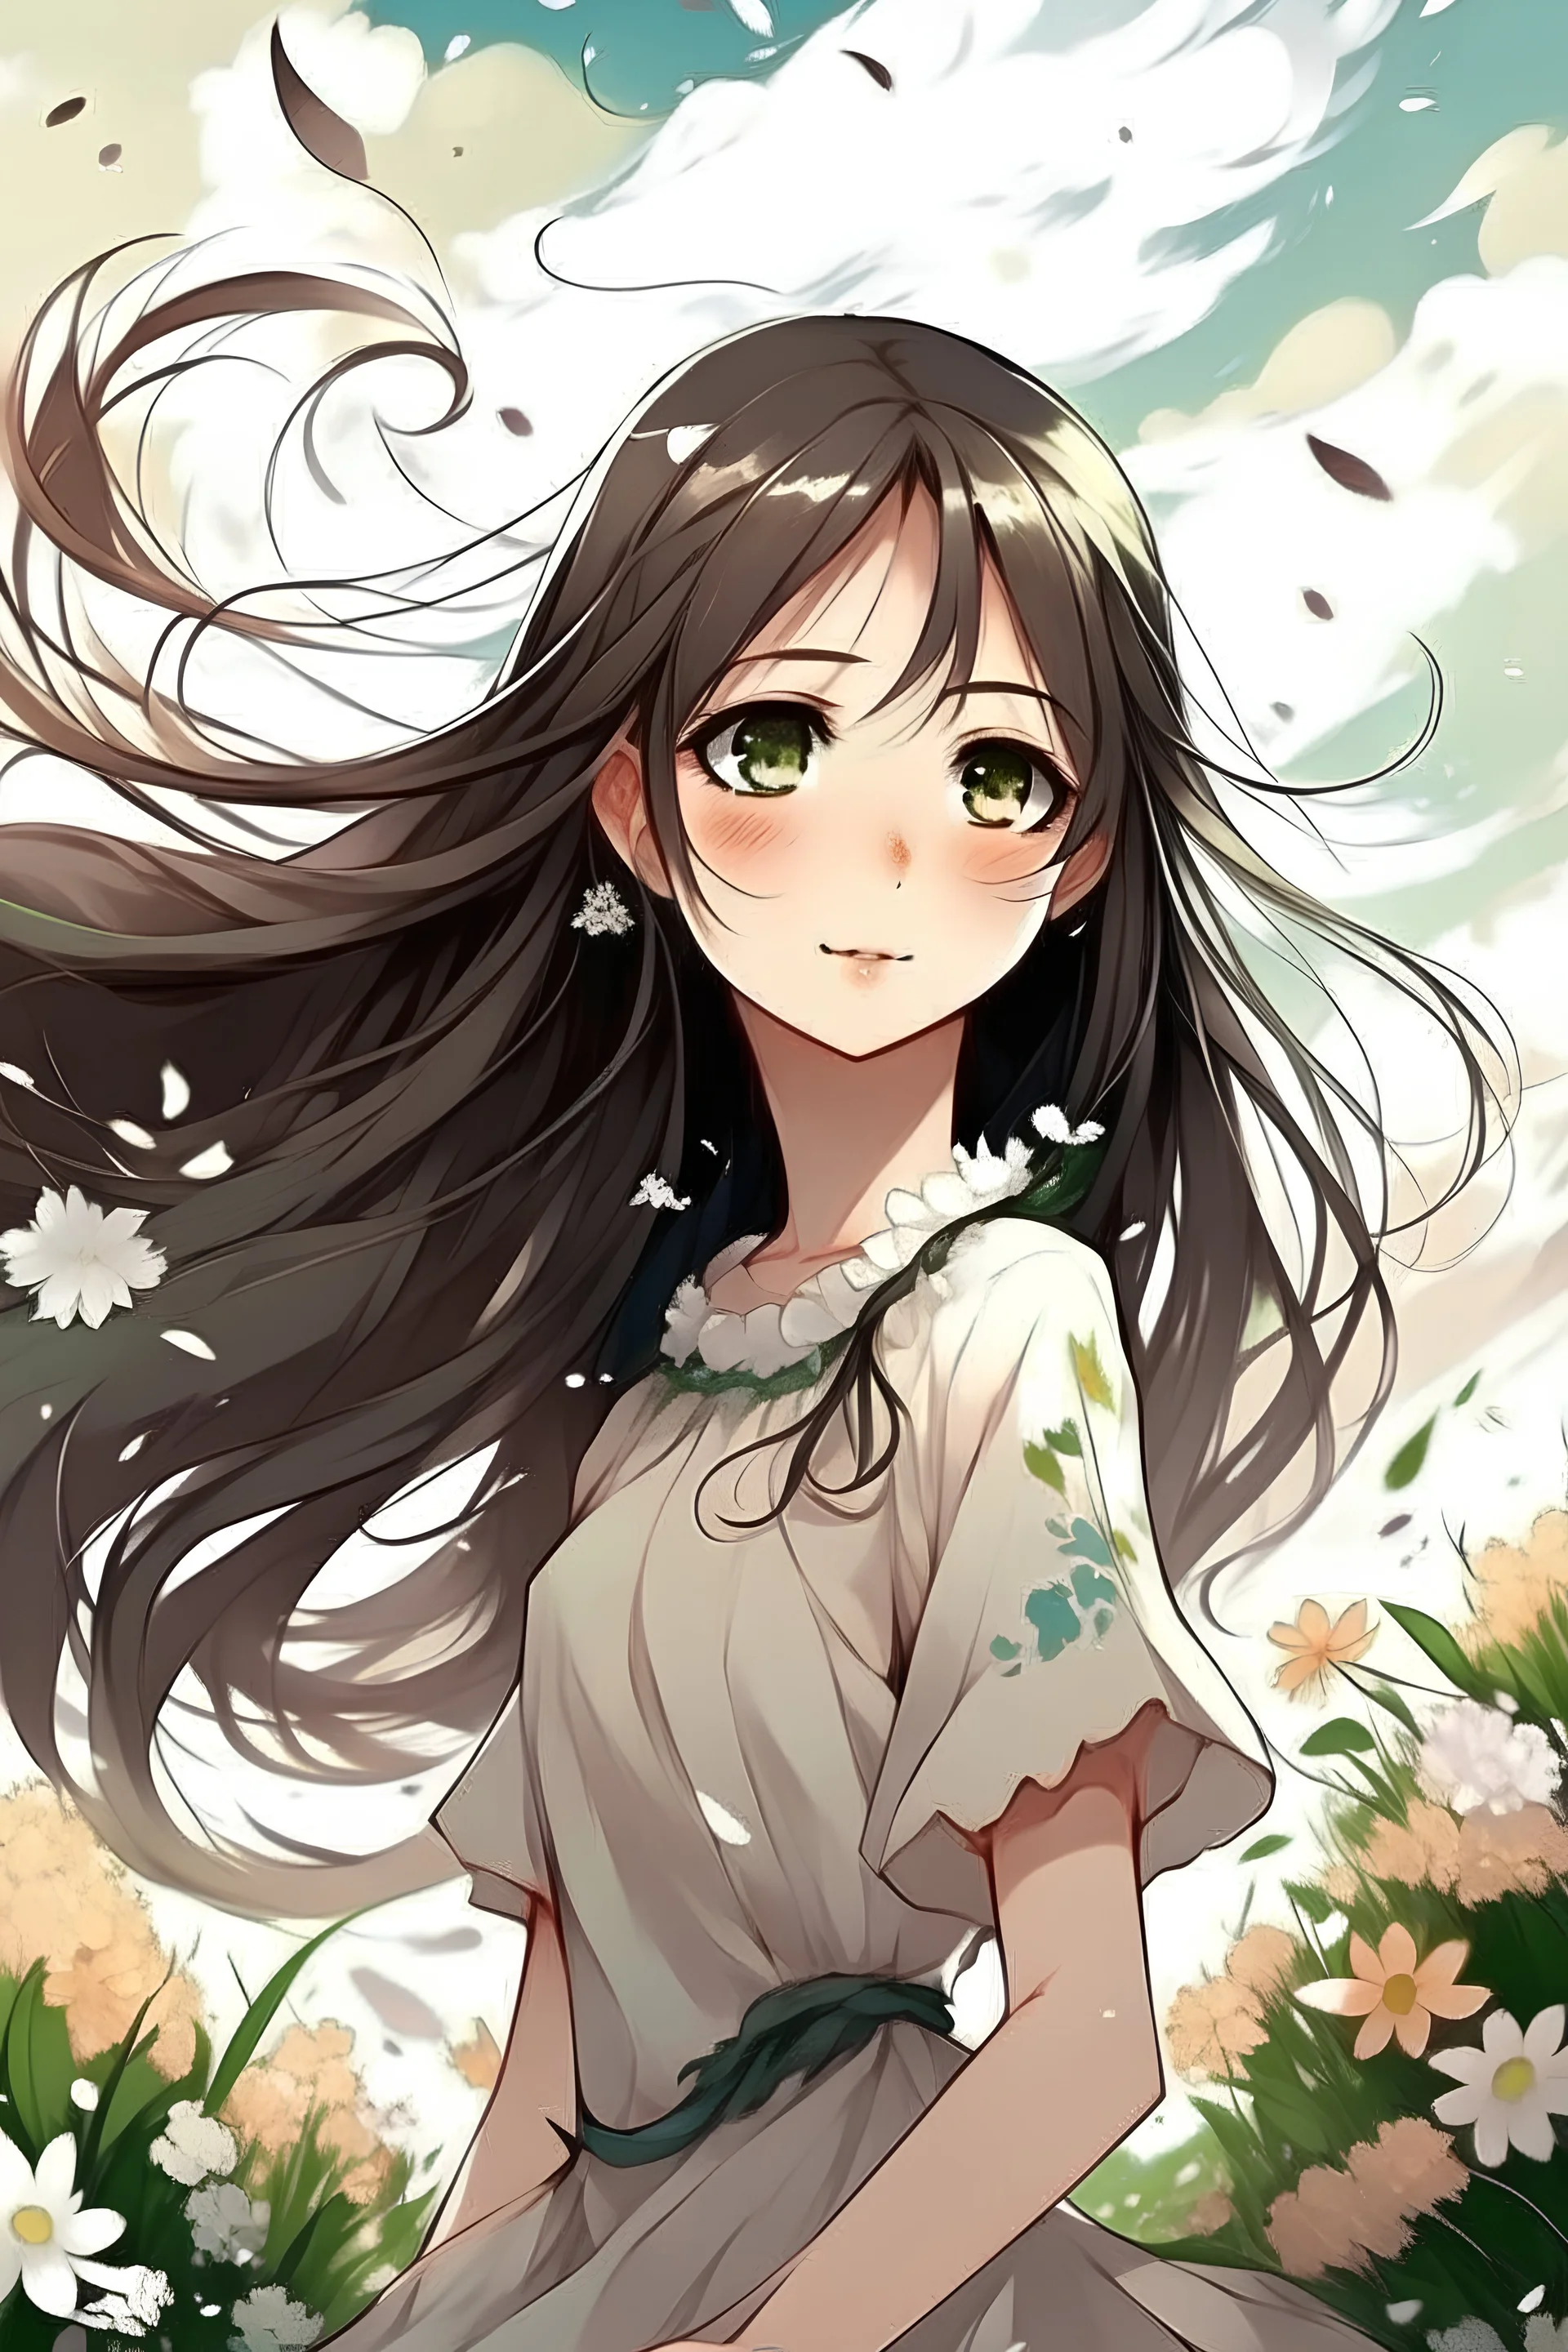 Cute anime girl, brown eyes, long black hair, spring totally white dress with flowers. Windy day